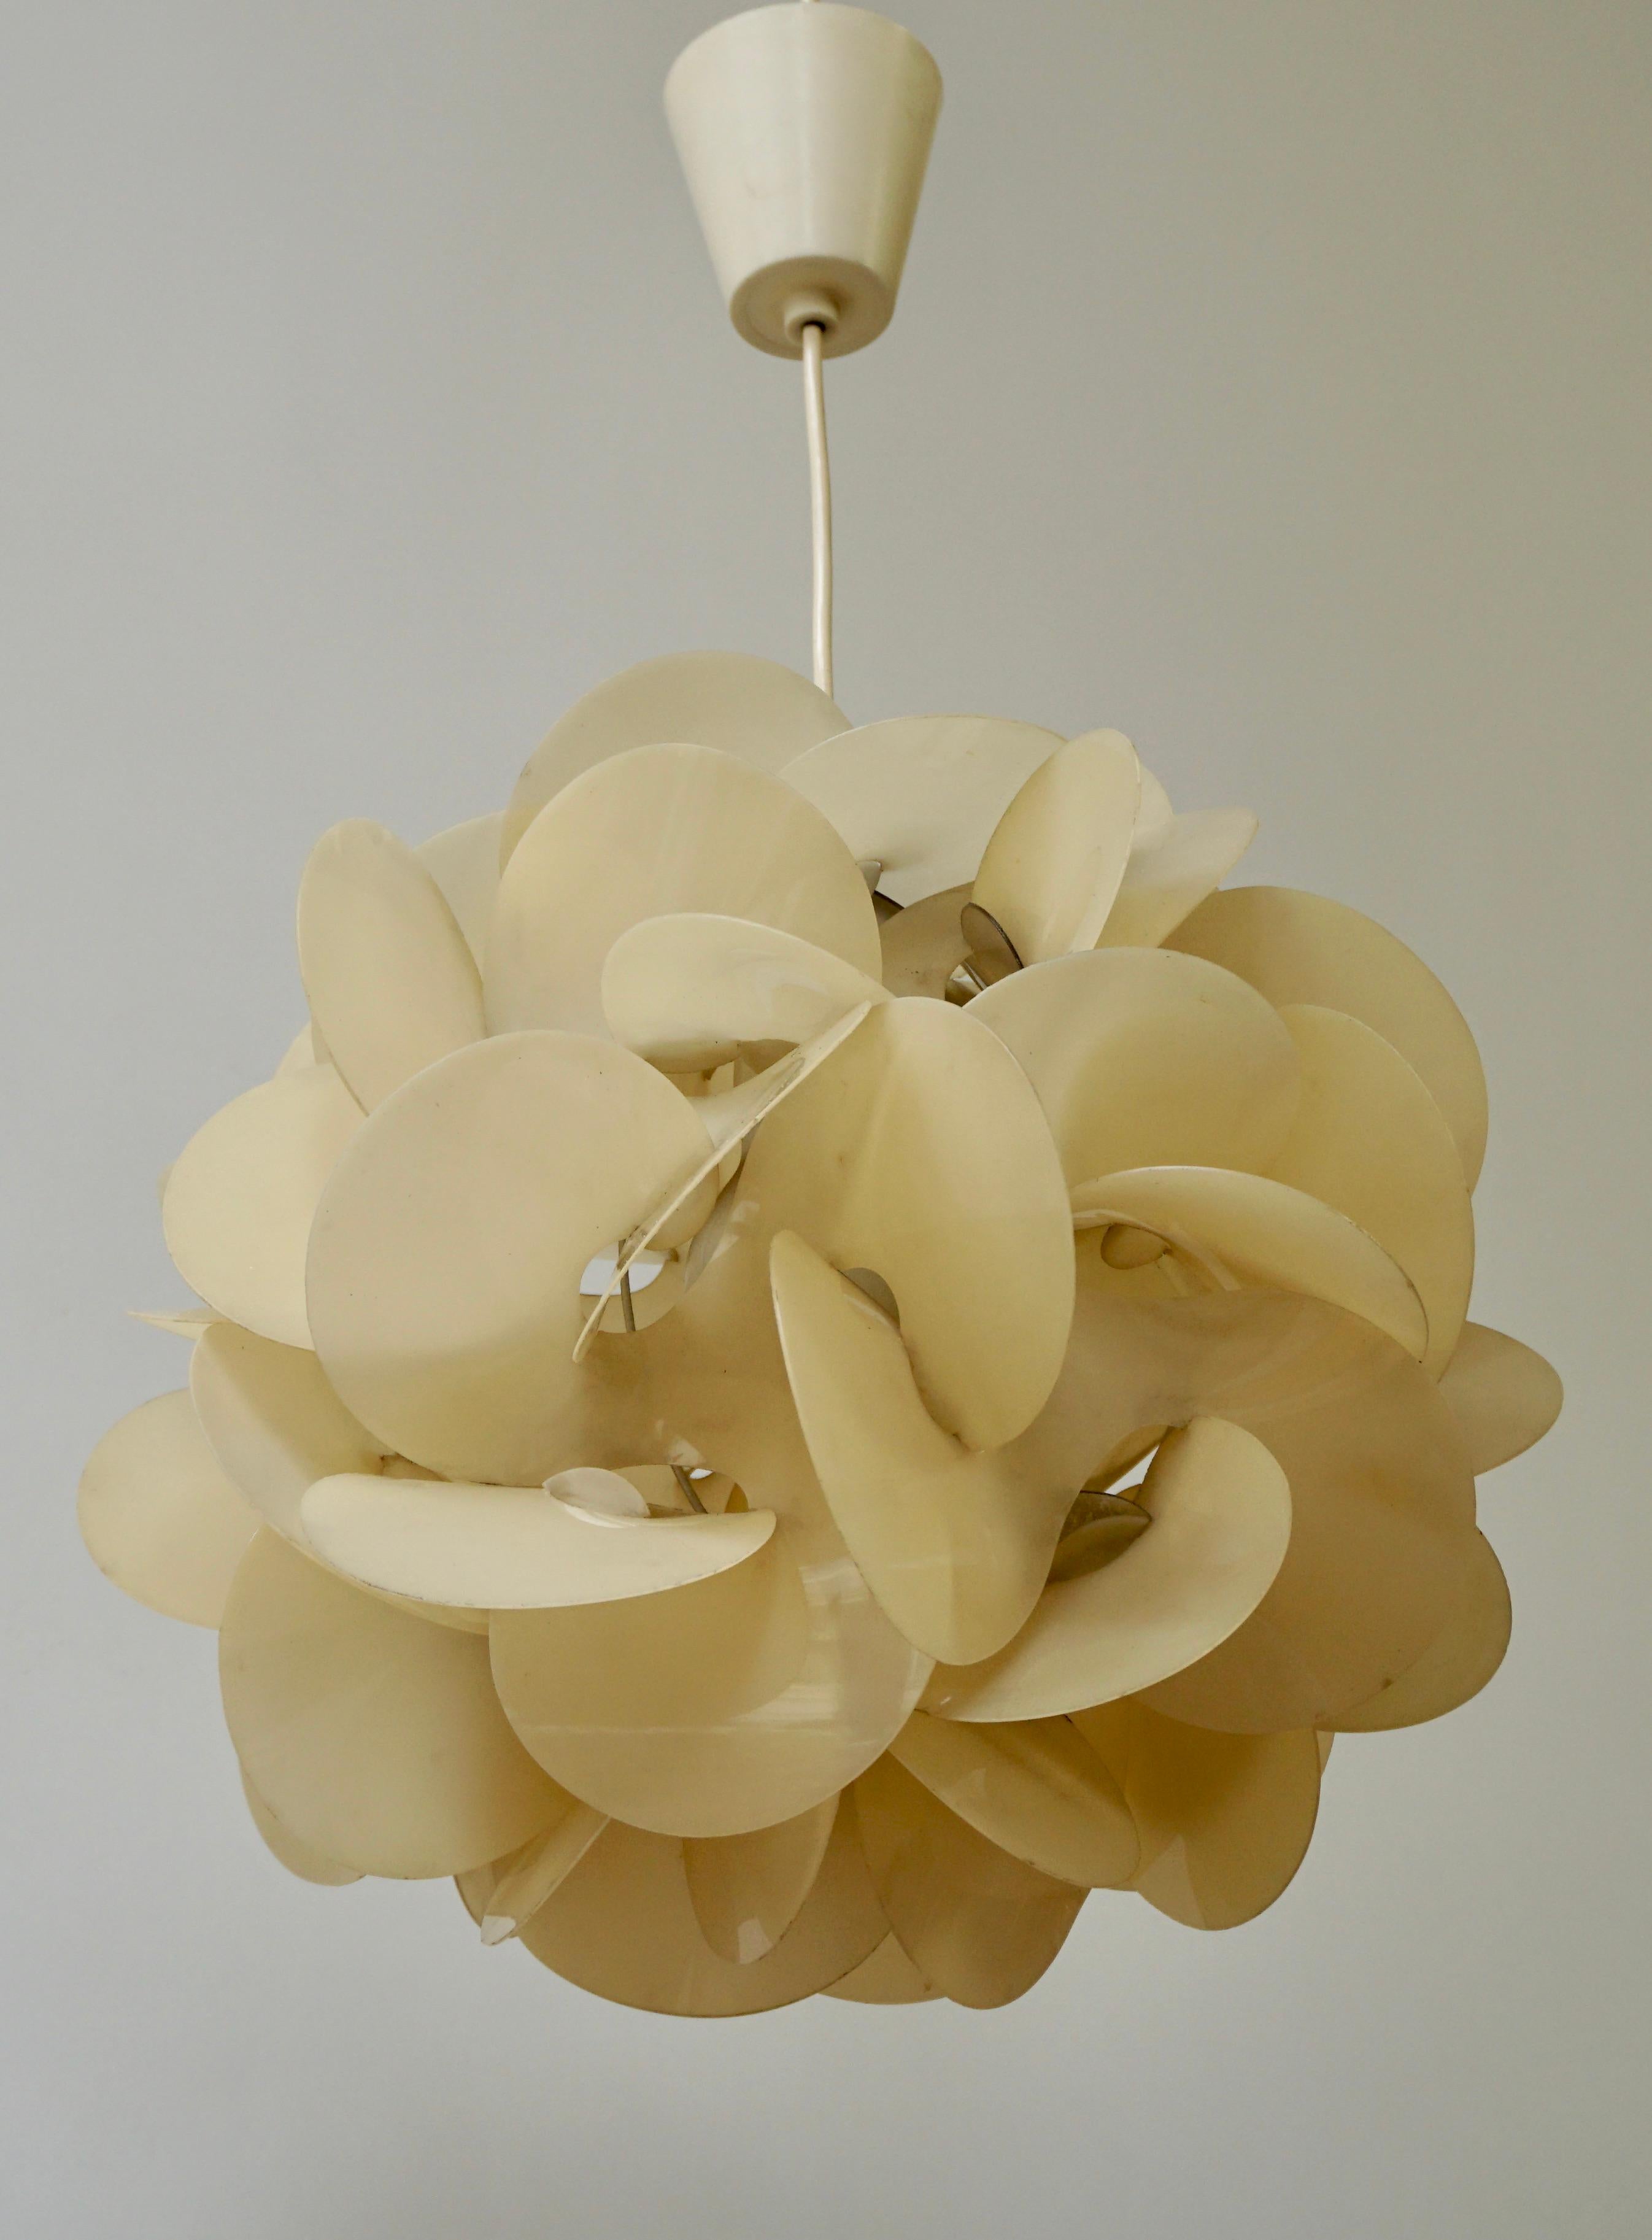 This pendant or ceiling lamp was designed by Raoul Raba. It is made from plastic with a metal wire frame inside.
Model: Rose des sables
Measures: Diameter 33 cm.